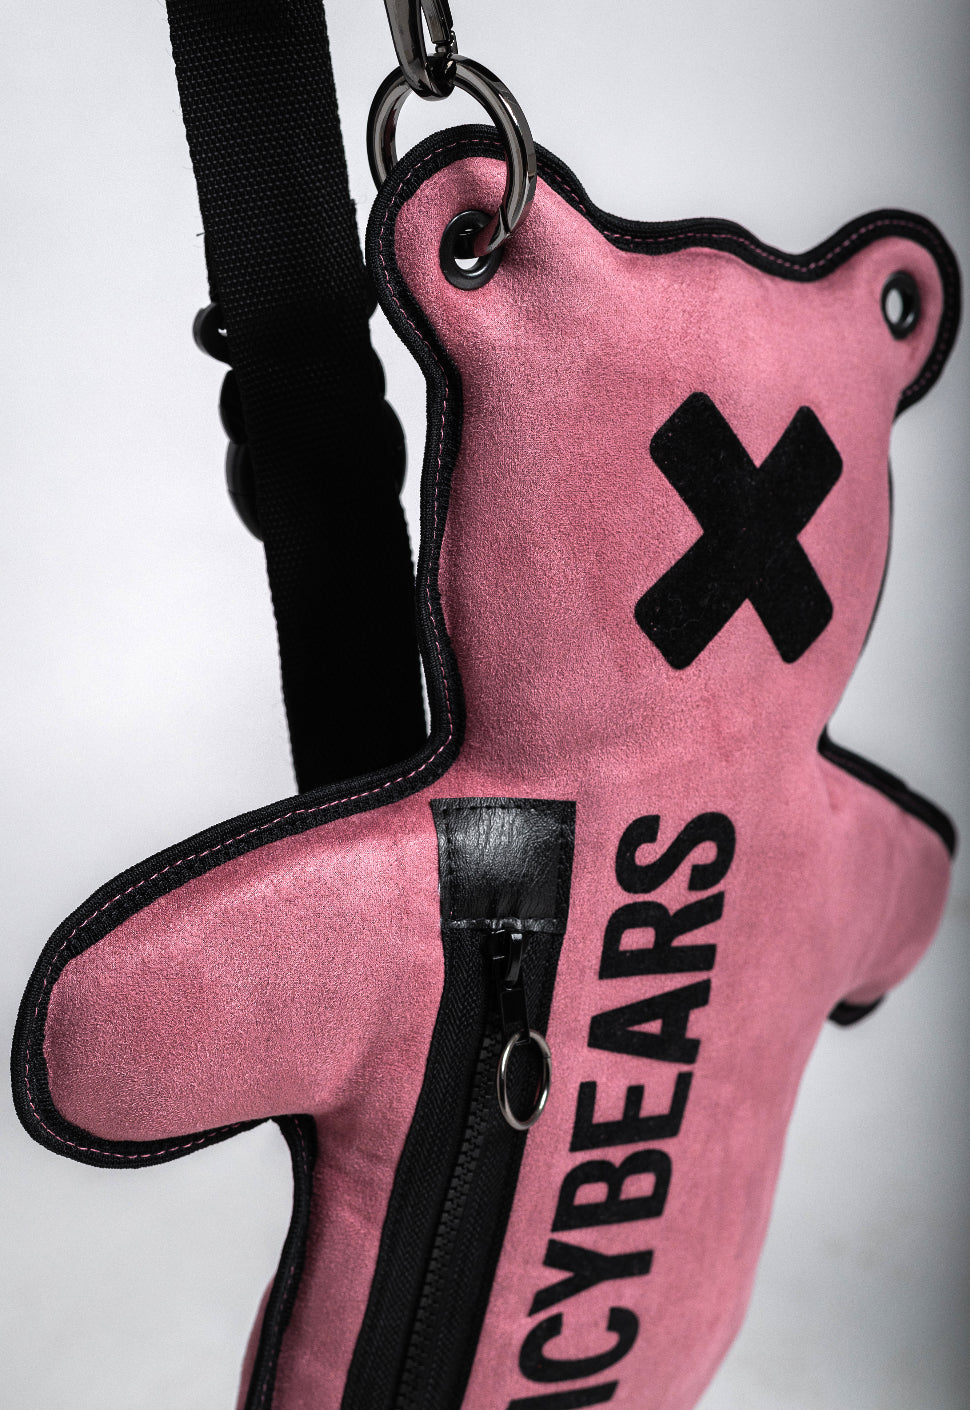 The perfect streetwear accessory - a huggable bear-shaped crossbody bag in dusty rose faux suede with black velvet print by SPICYBEARS